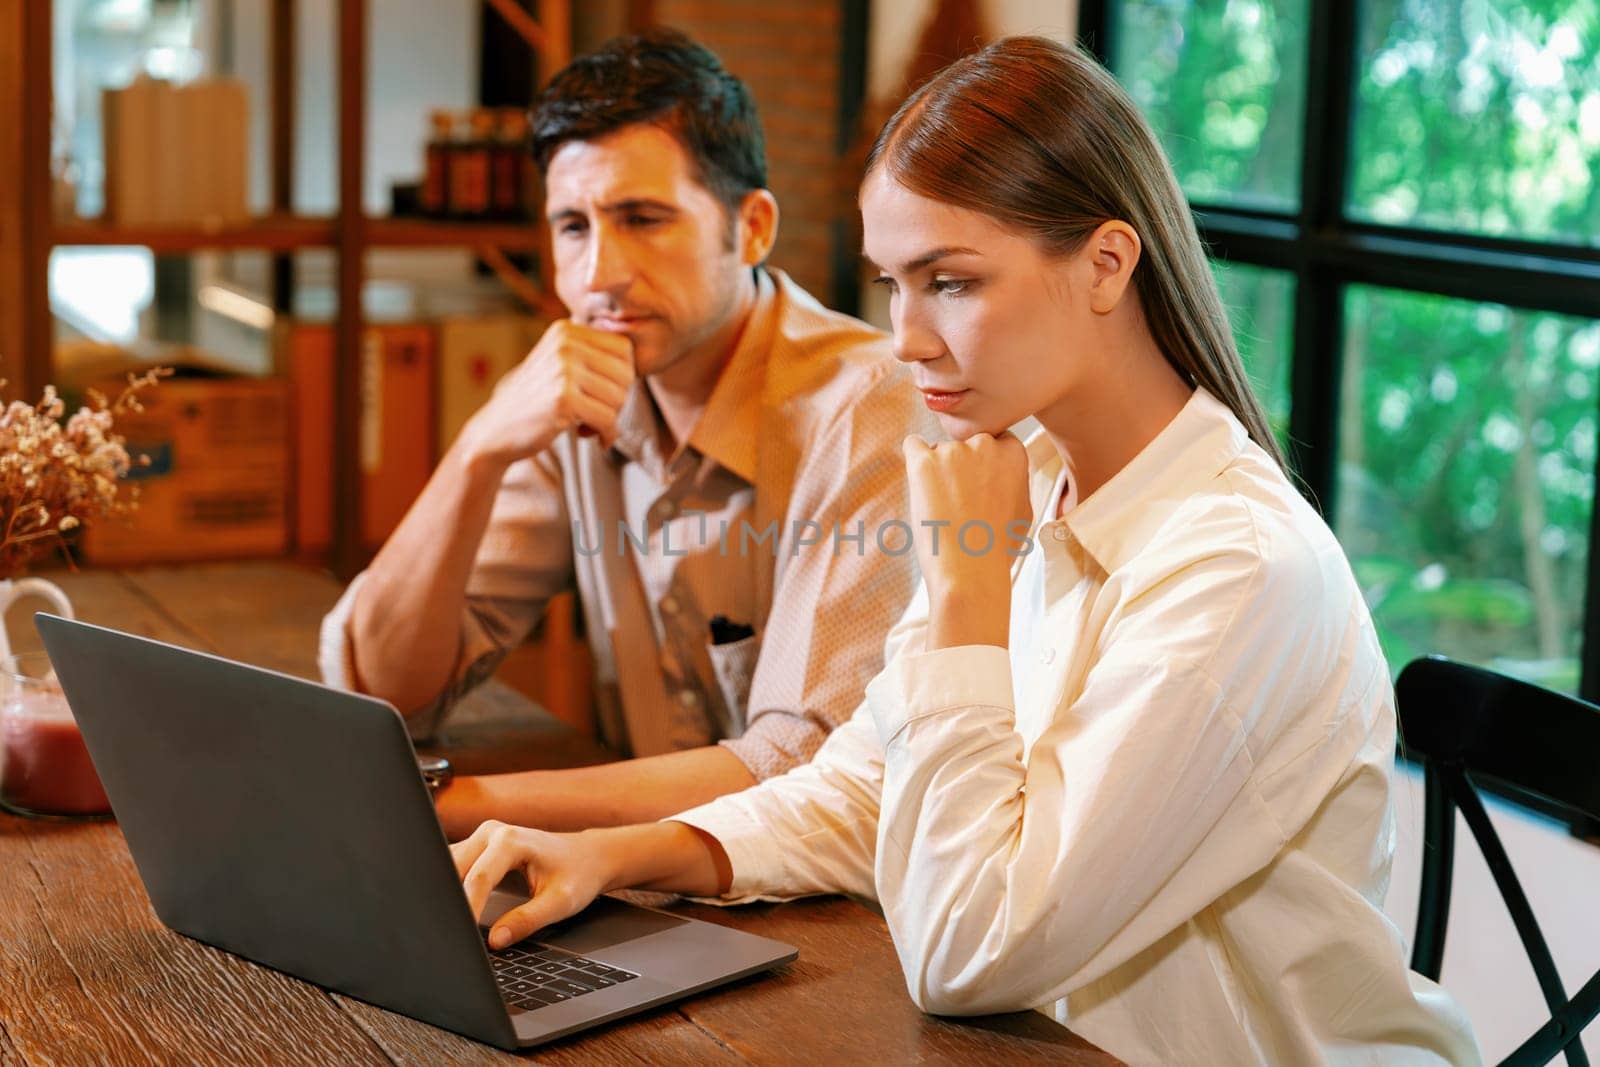 Young couple working remotely on laptop in cafe look tired and frustrated. Digital nomad freelancers or college students struggling to meet a deadline overwhelmed by workload. Expedient